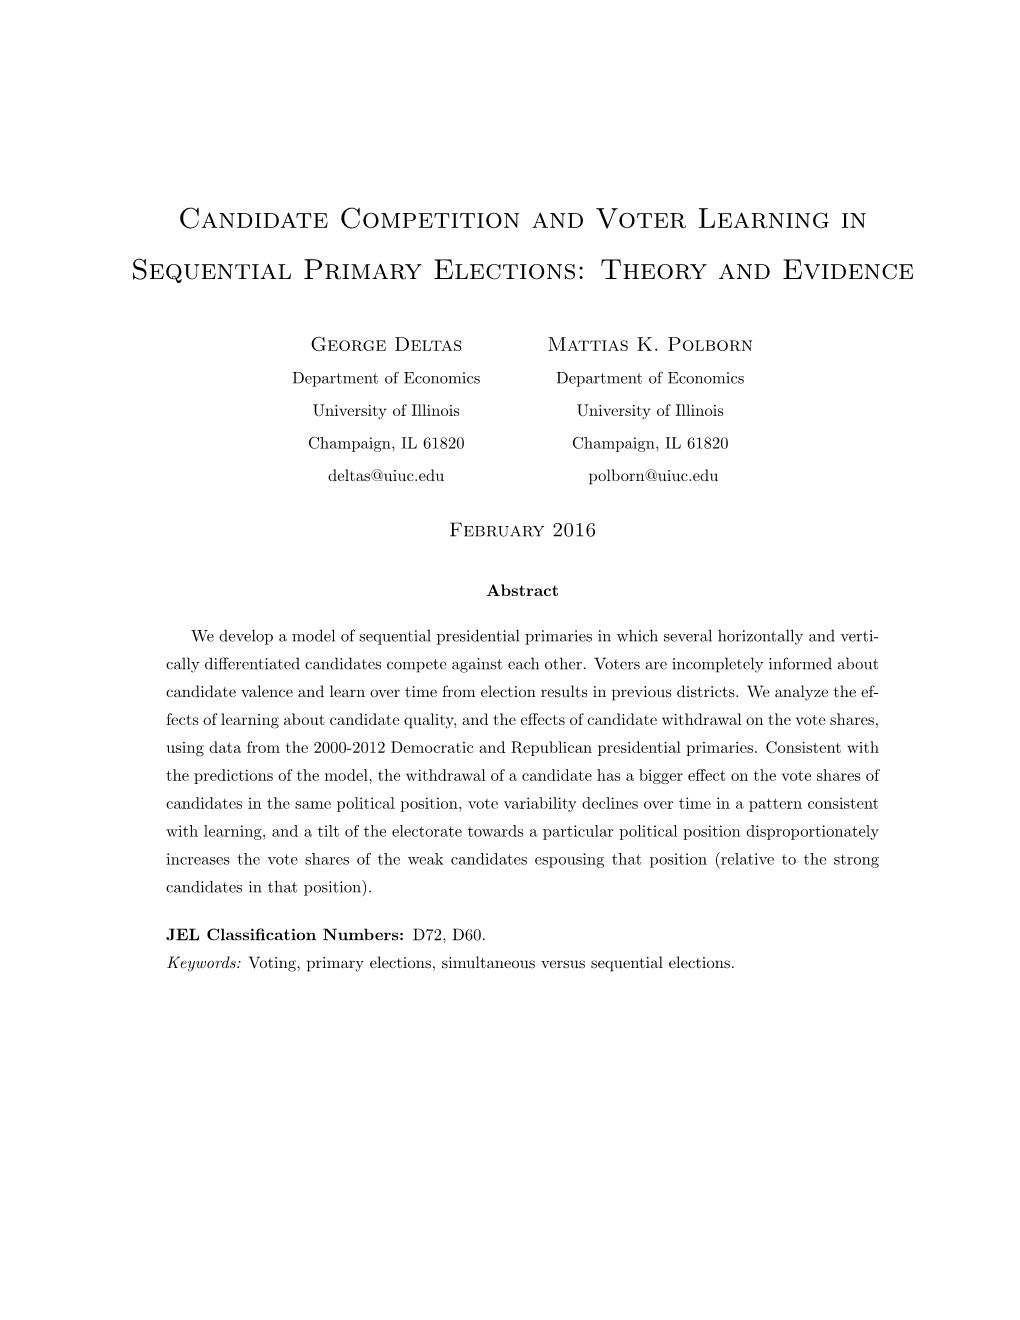 Candidate Competition and Voter Learning in Sequential Primary Elections: Theory and Evidence